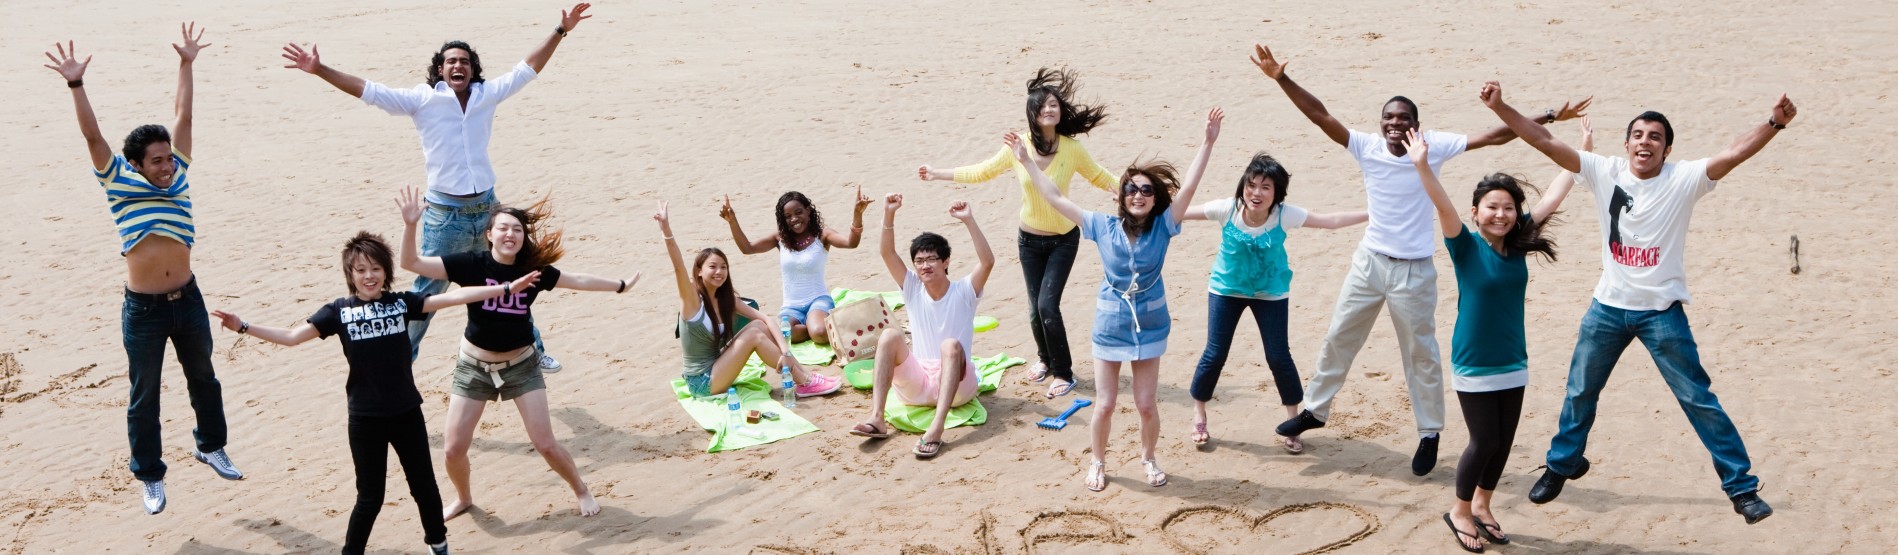 students on the beach